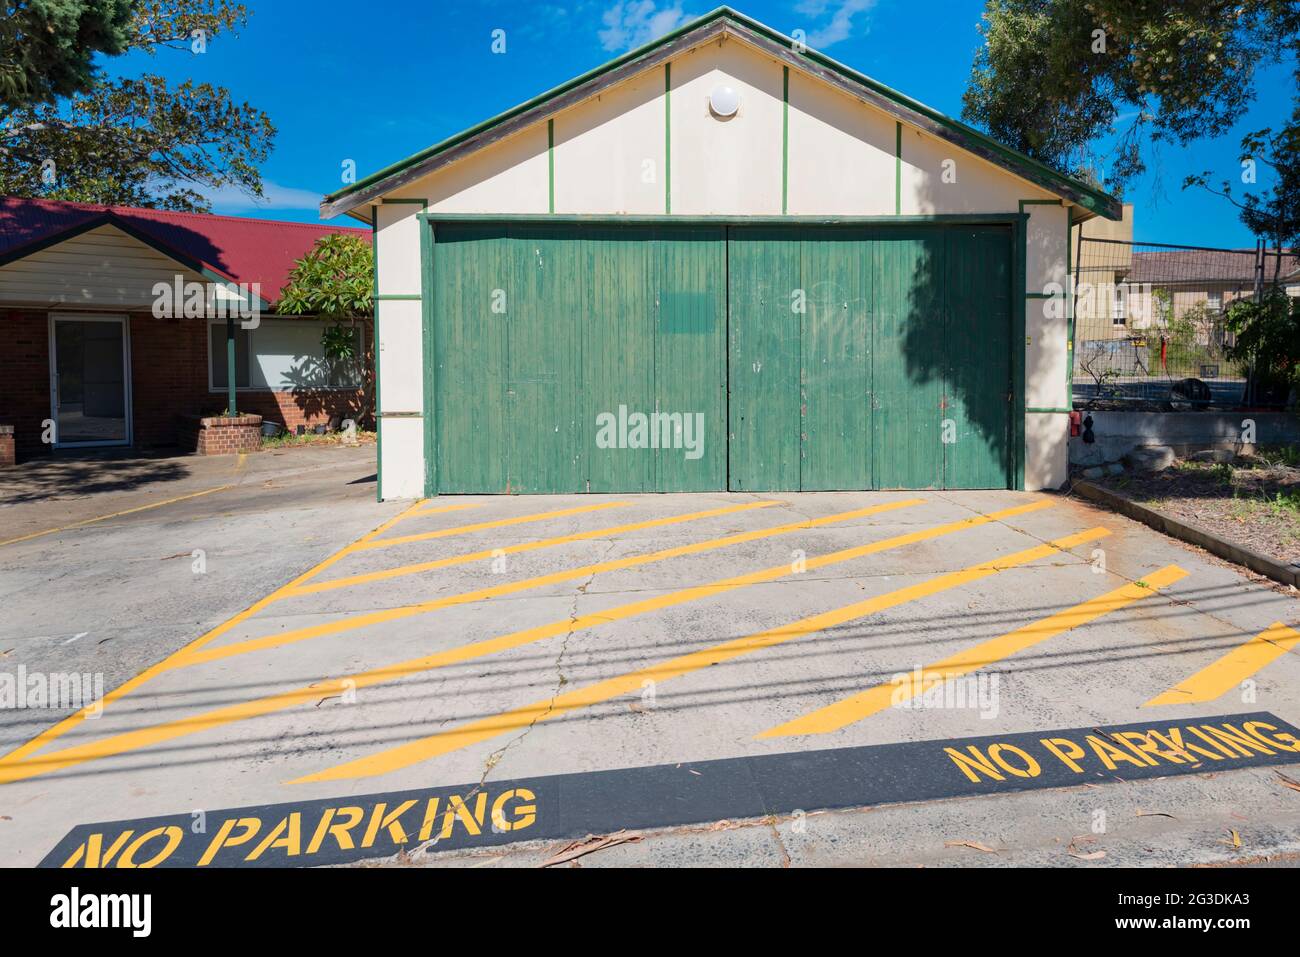 Yellow diagonal painted lines on a concrete driveway mark a no parking zone in front of an old fibro double garage in Sydney, Australia Stock Photo